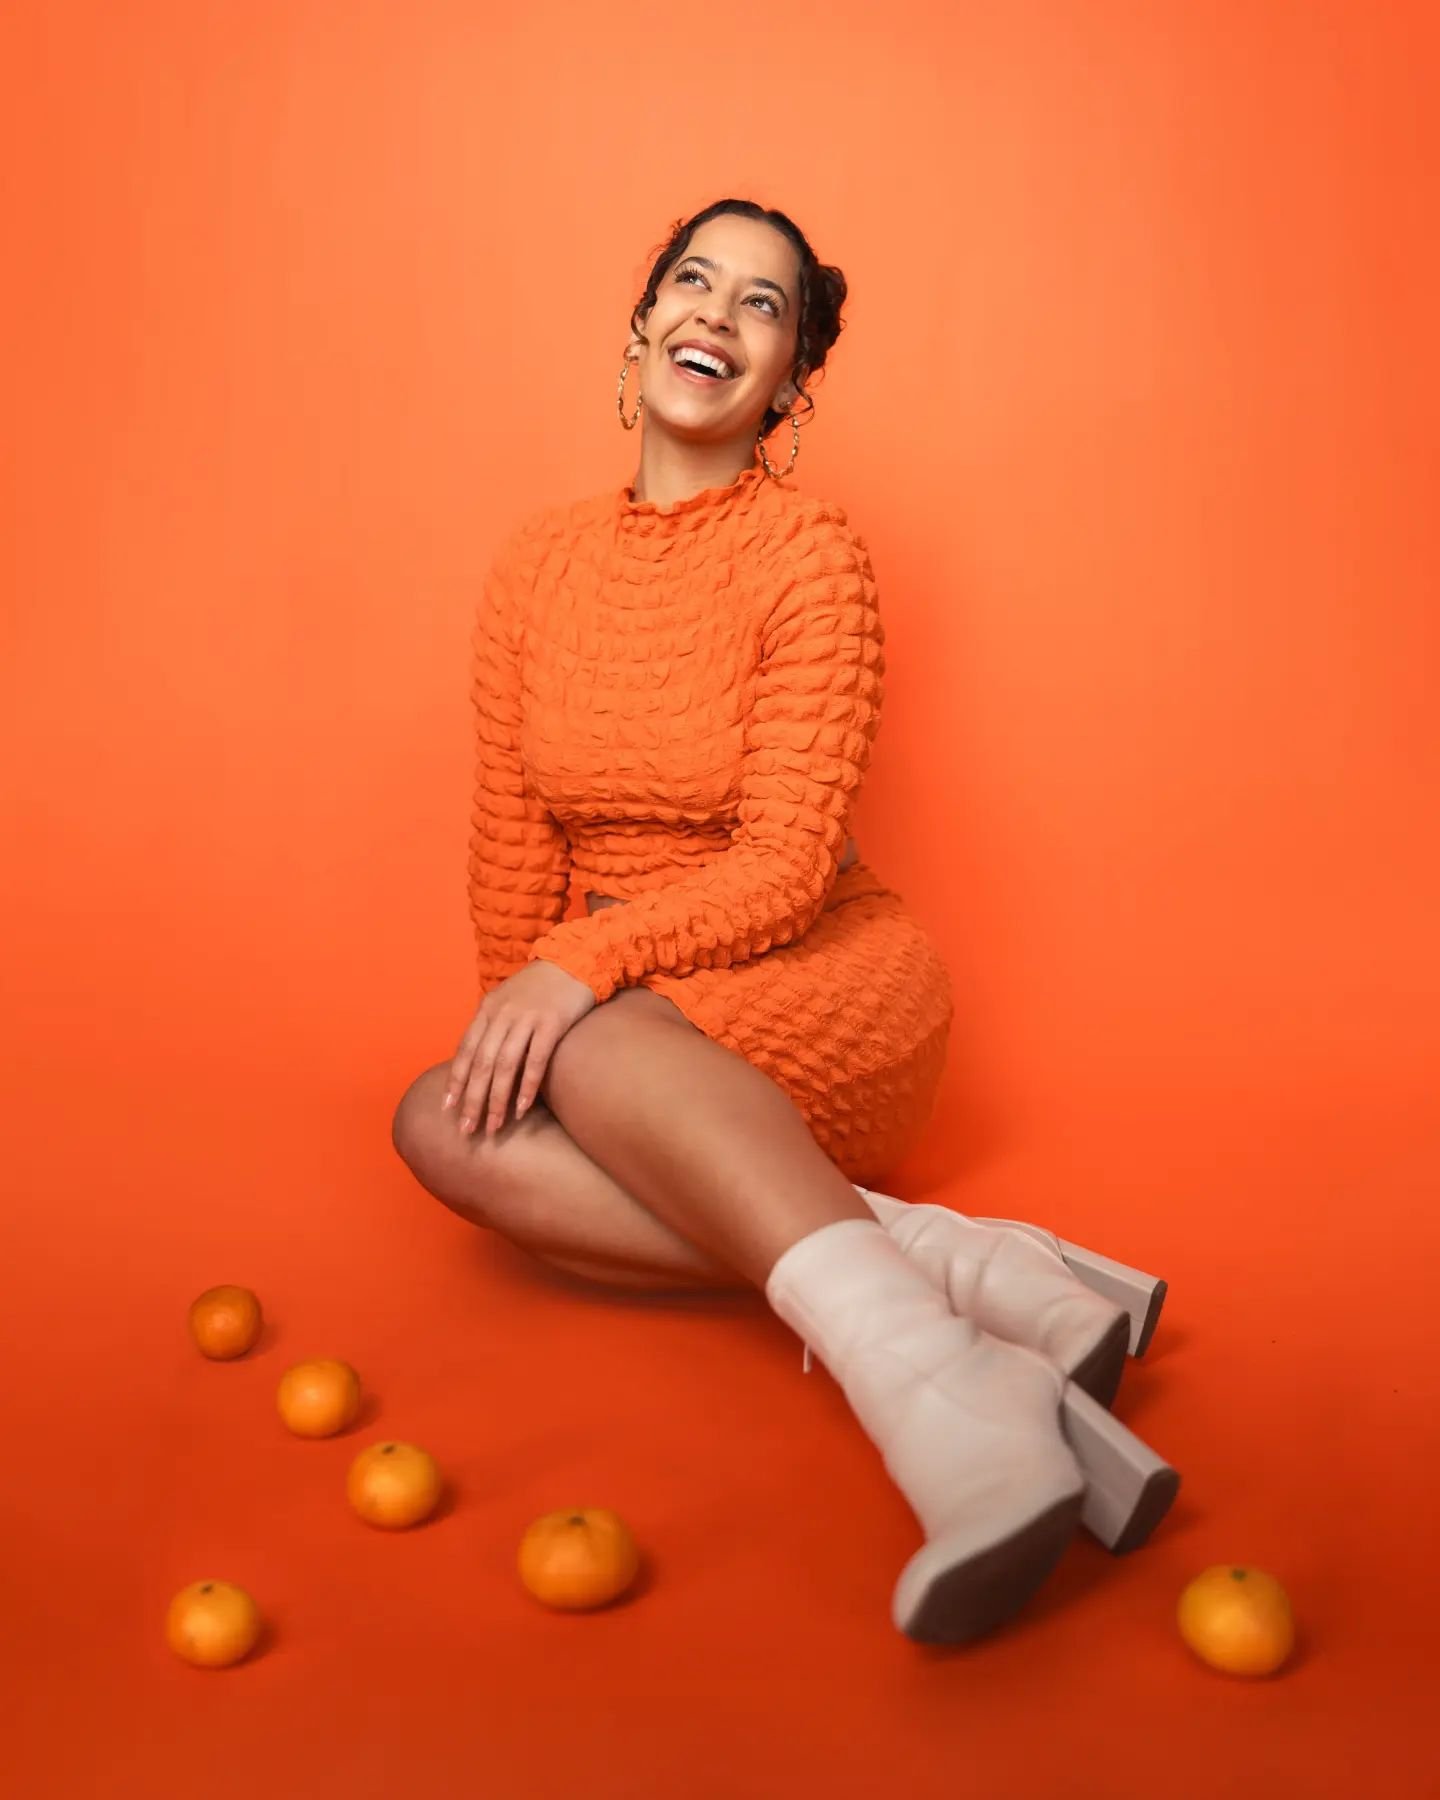 Orange crush 🟠⏺️🟠

---

When we unpackaged this wardrobe and backdrop with the produce, my mono dreams came into fruition. 🍊🧡🍊🍊 We are still working on getting through eating all these oranges, but am so glad this concept came to life. Let's ke